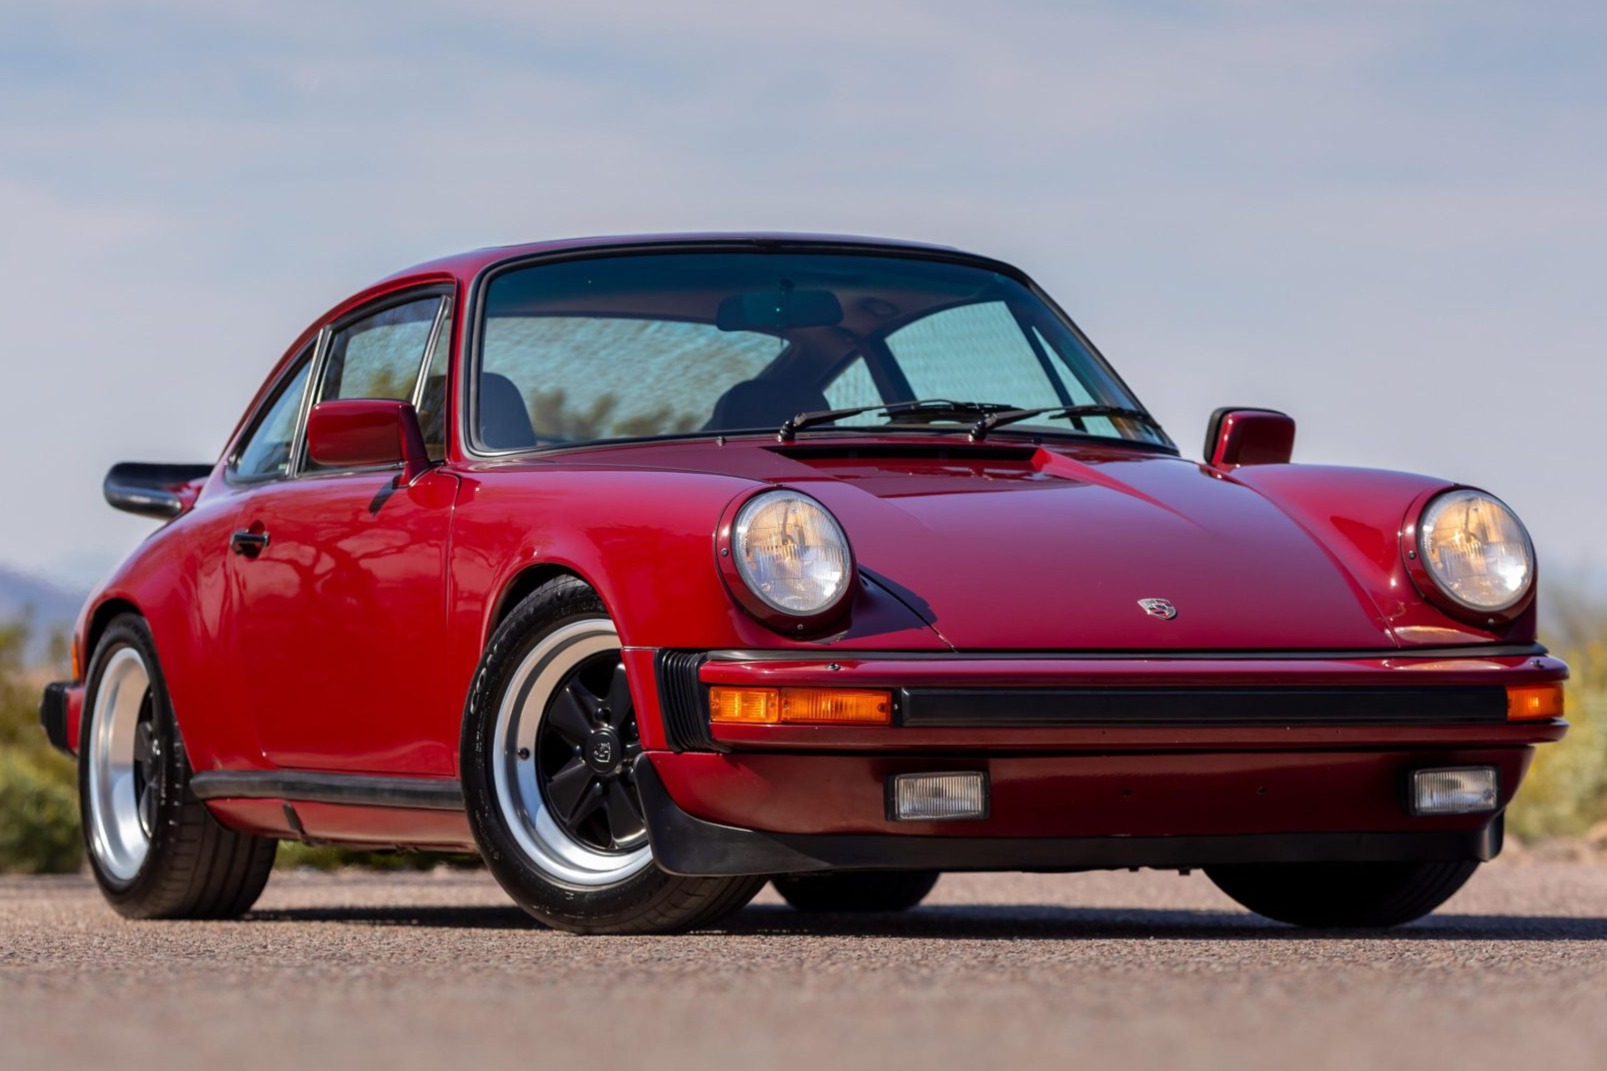 Used 930-Powered RoW 1977 Porsche 911 Carrera Coupe Conversion Review